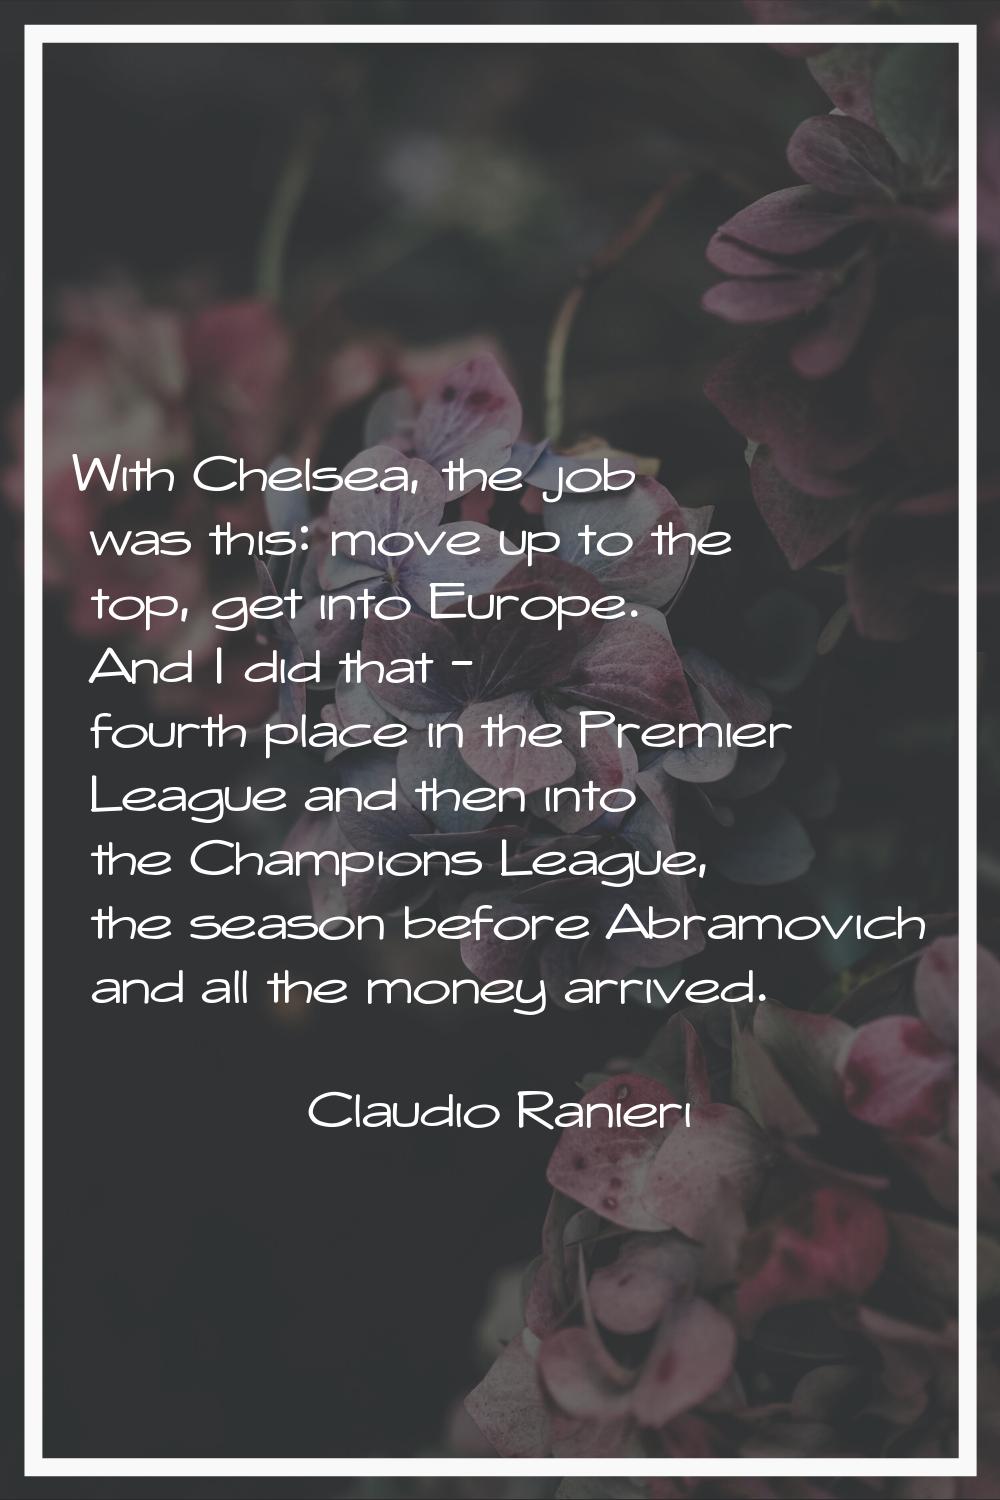 With Chelsea, the job was this: move up to the top, get into Europe. And I did that - fourth place 